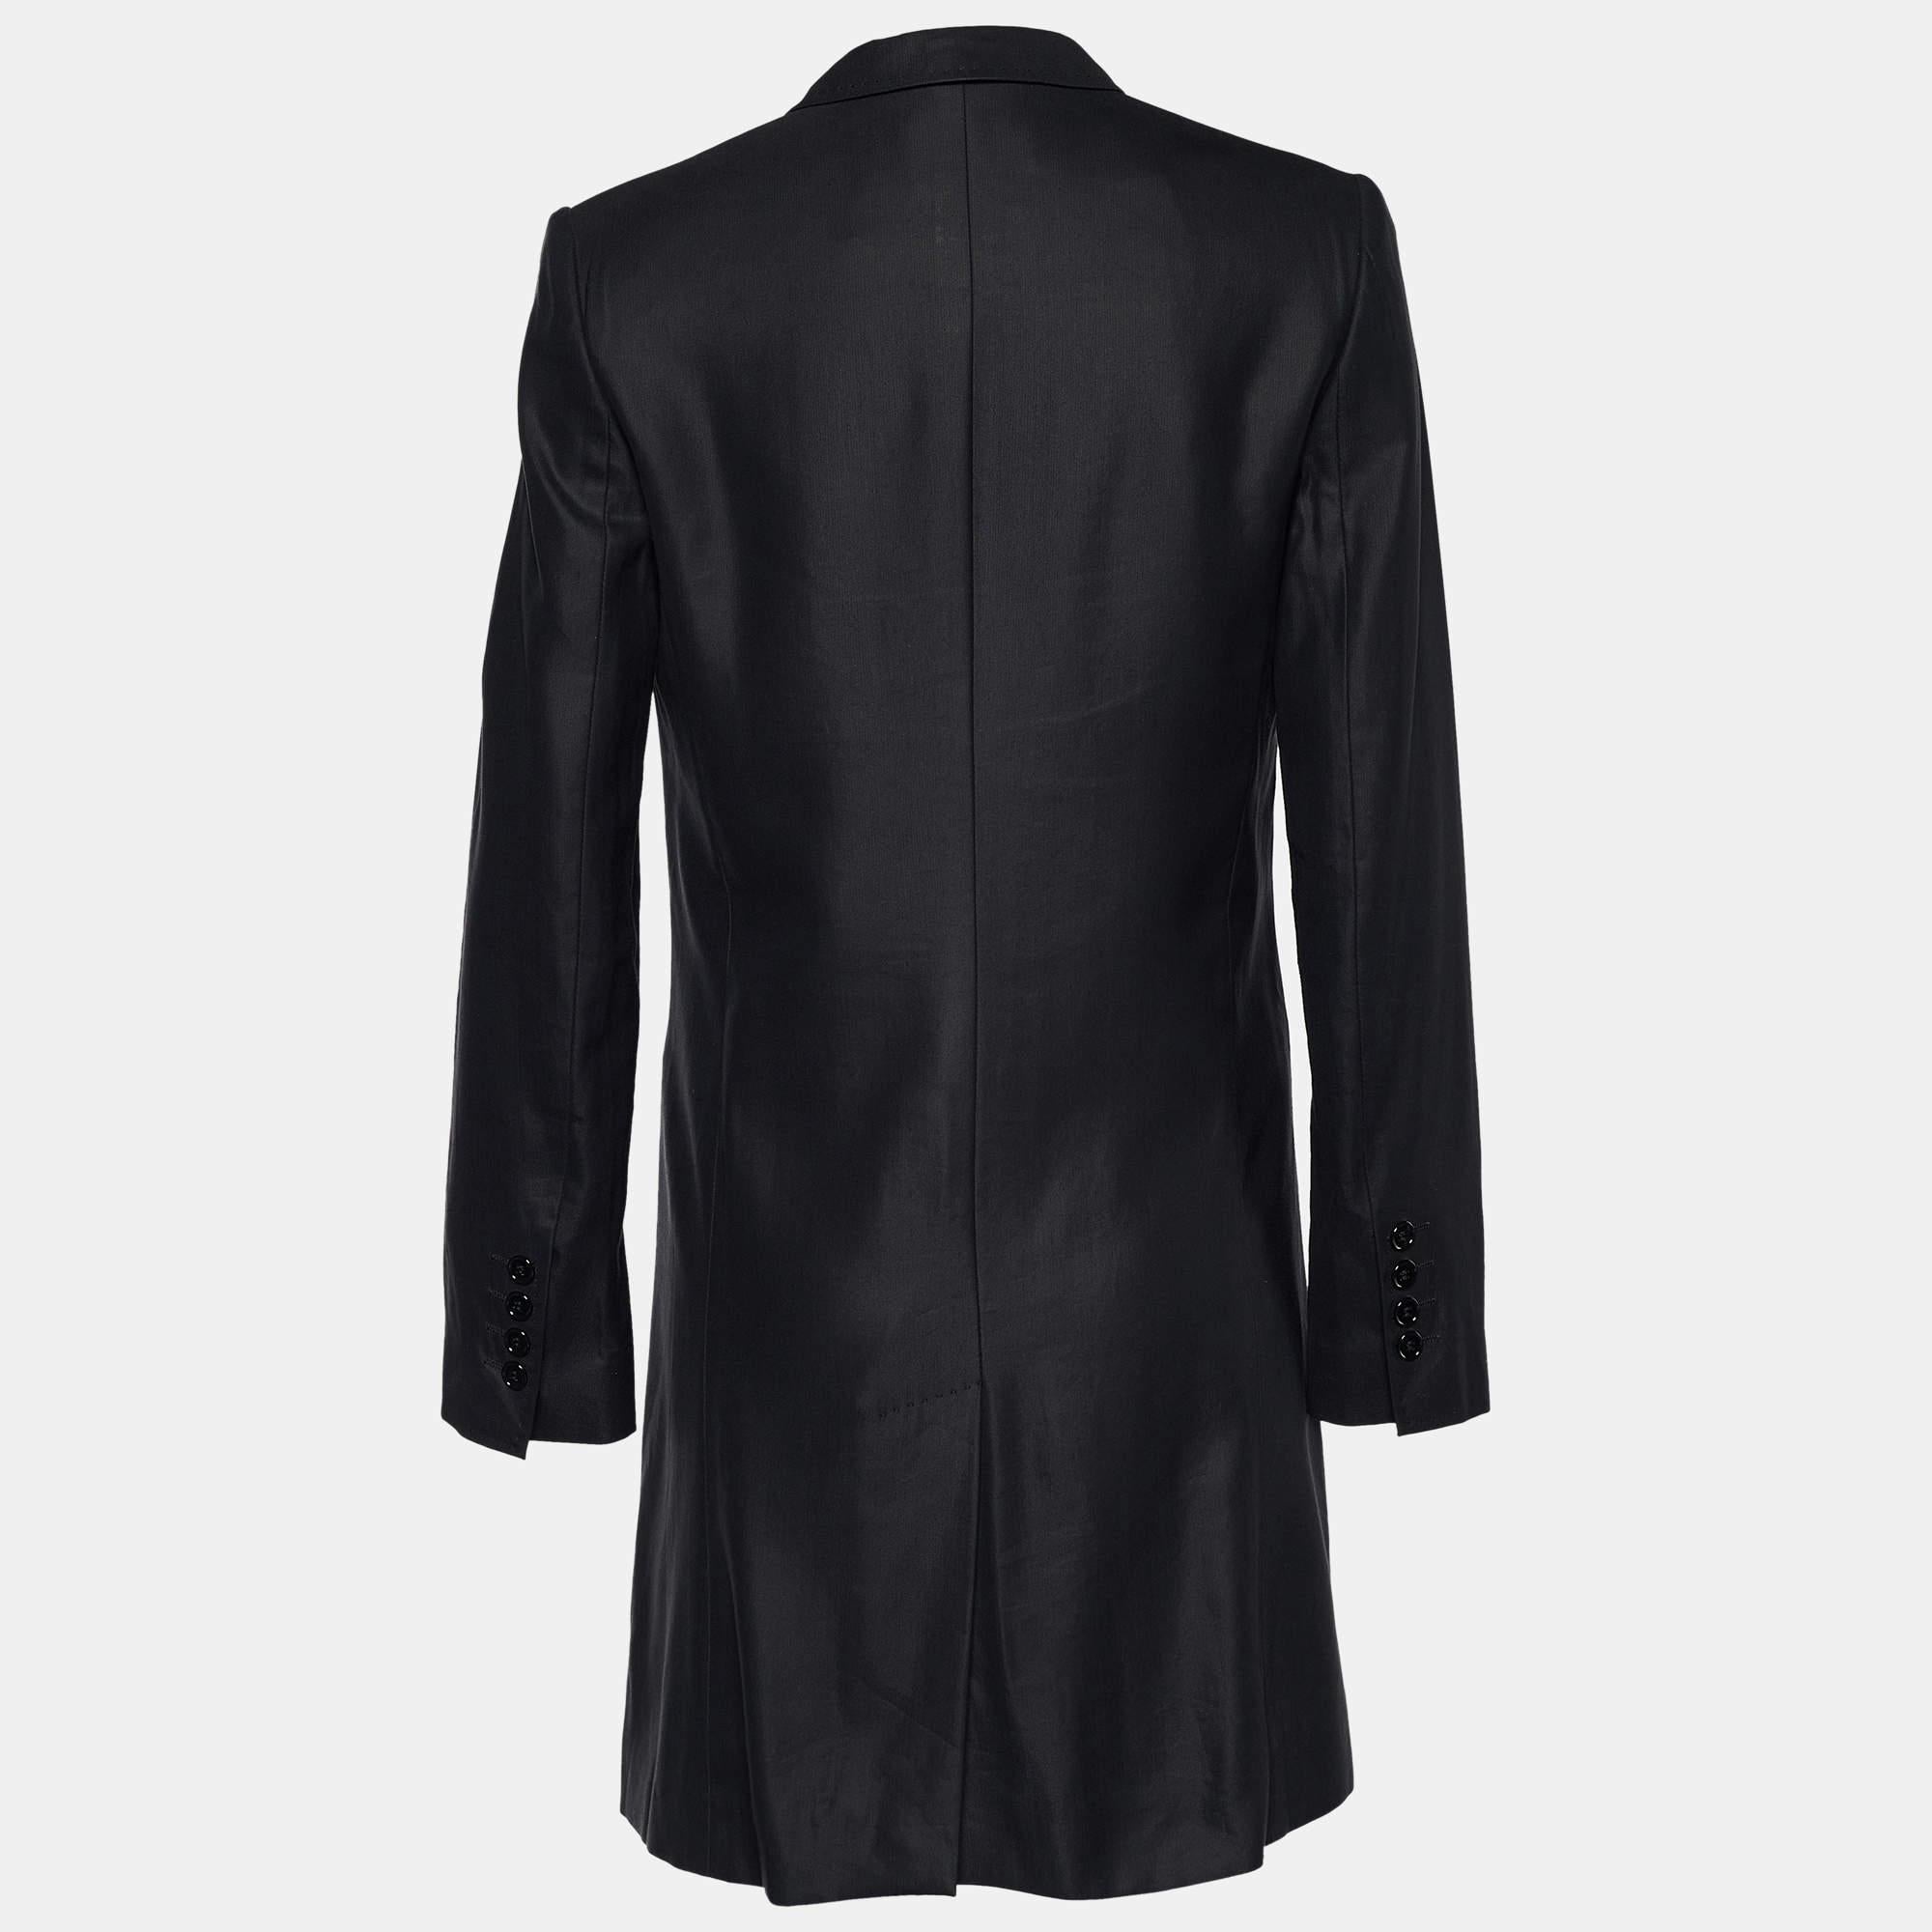 To add some extra elegance to your winter wardrobe, this coat from Dolce & Gabbana is all you need. Featuring long sleeves and button detailing, the mid-length coat also comes with front pockets. The structured shape adds a polished touch.

